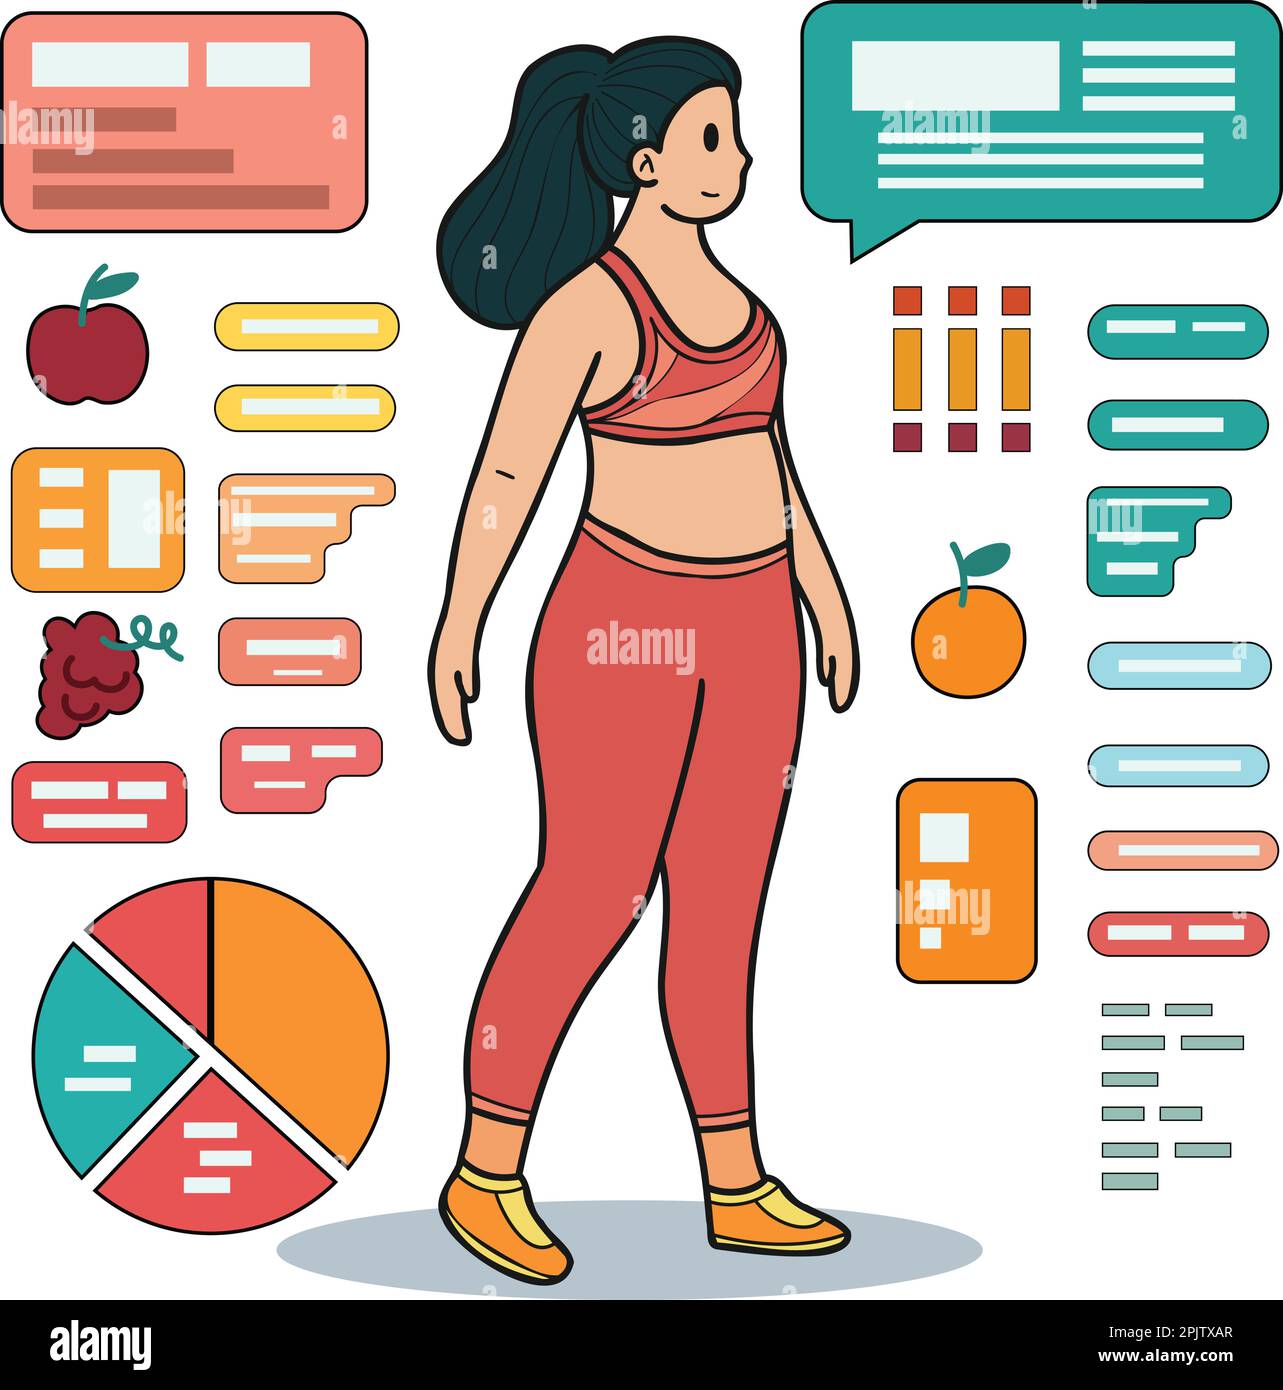 Set body of a woman before and after losing weight Stock Vector